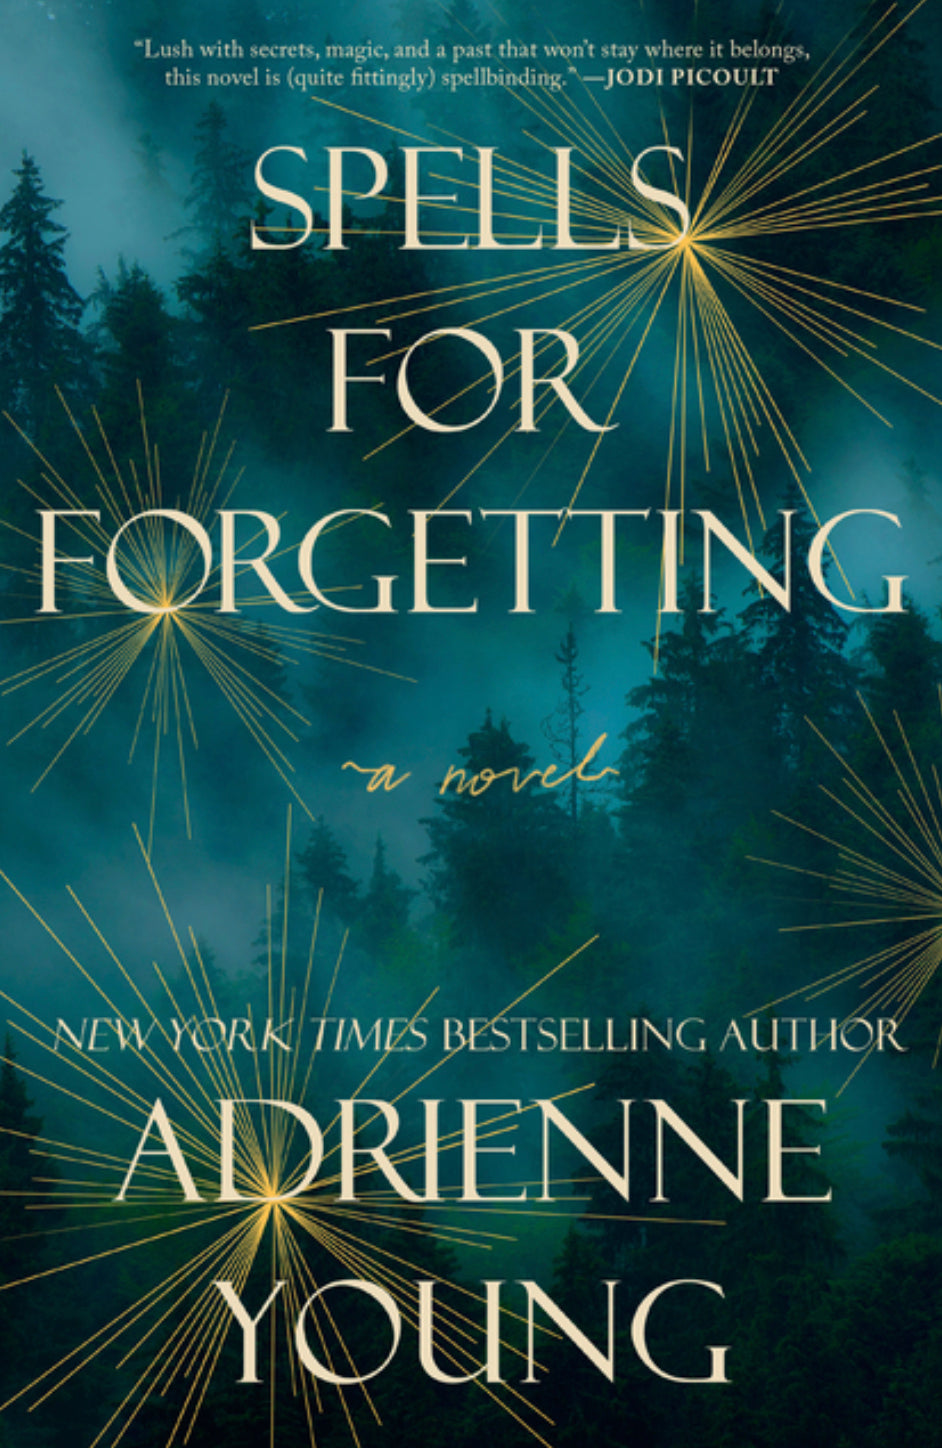 Spells For Forgetting - Adrienne Young